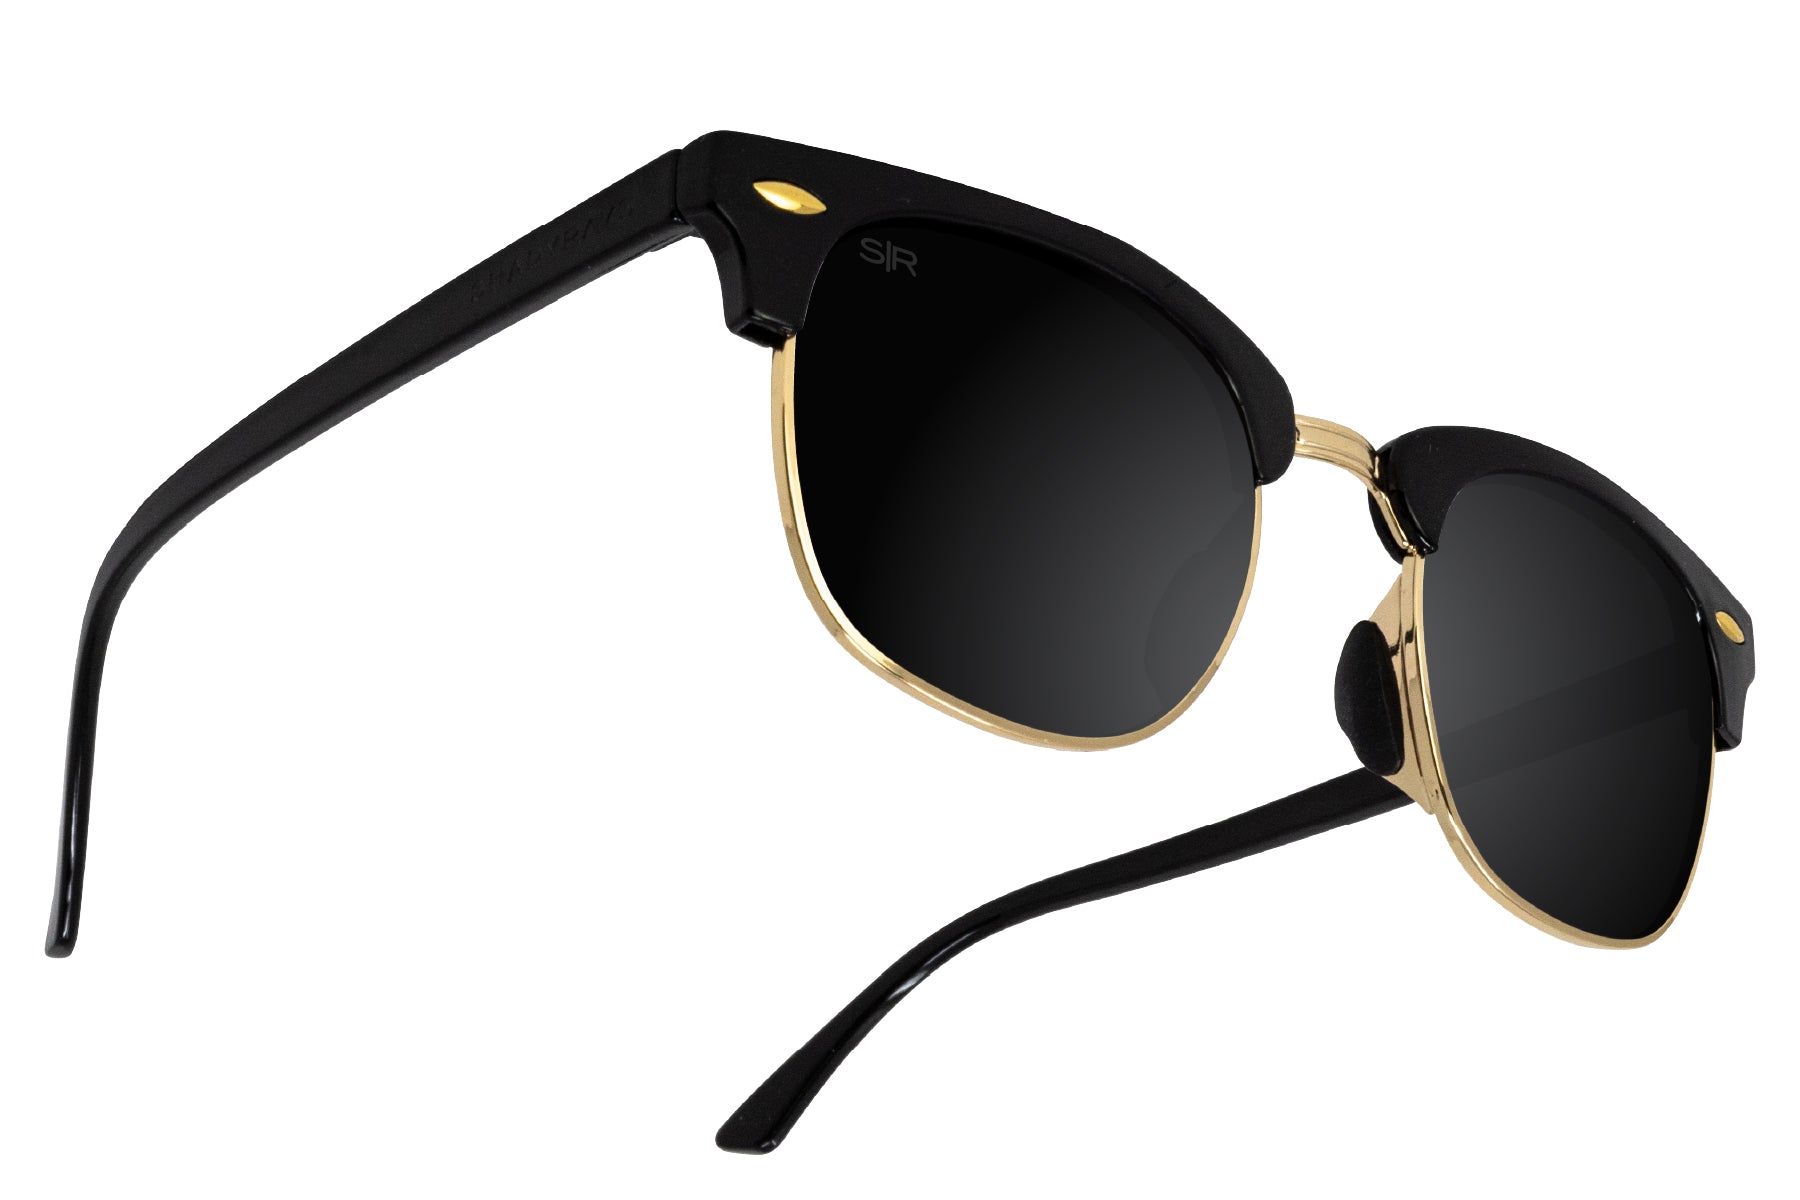 Discover more than 151 black glass sunglasses best